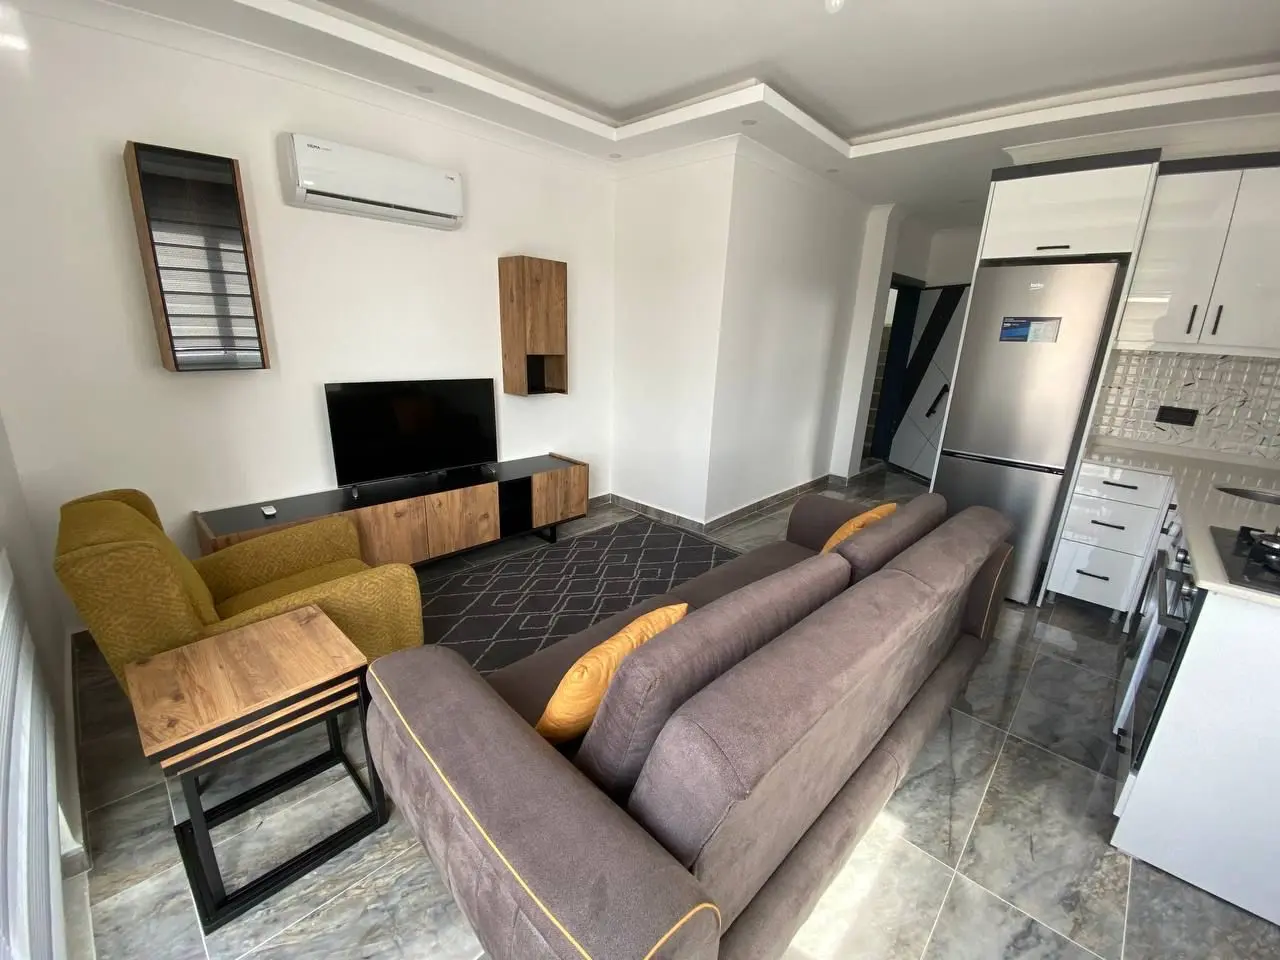 NEWLY BUİLT APARTMENT FOR SALE İN BEST LOCATİON OF KESTEL